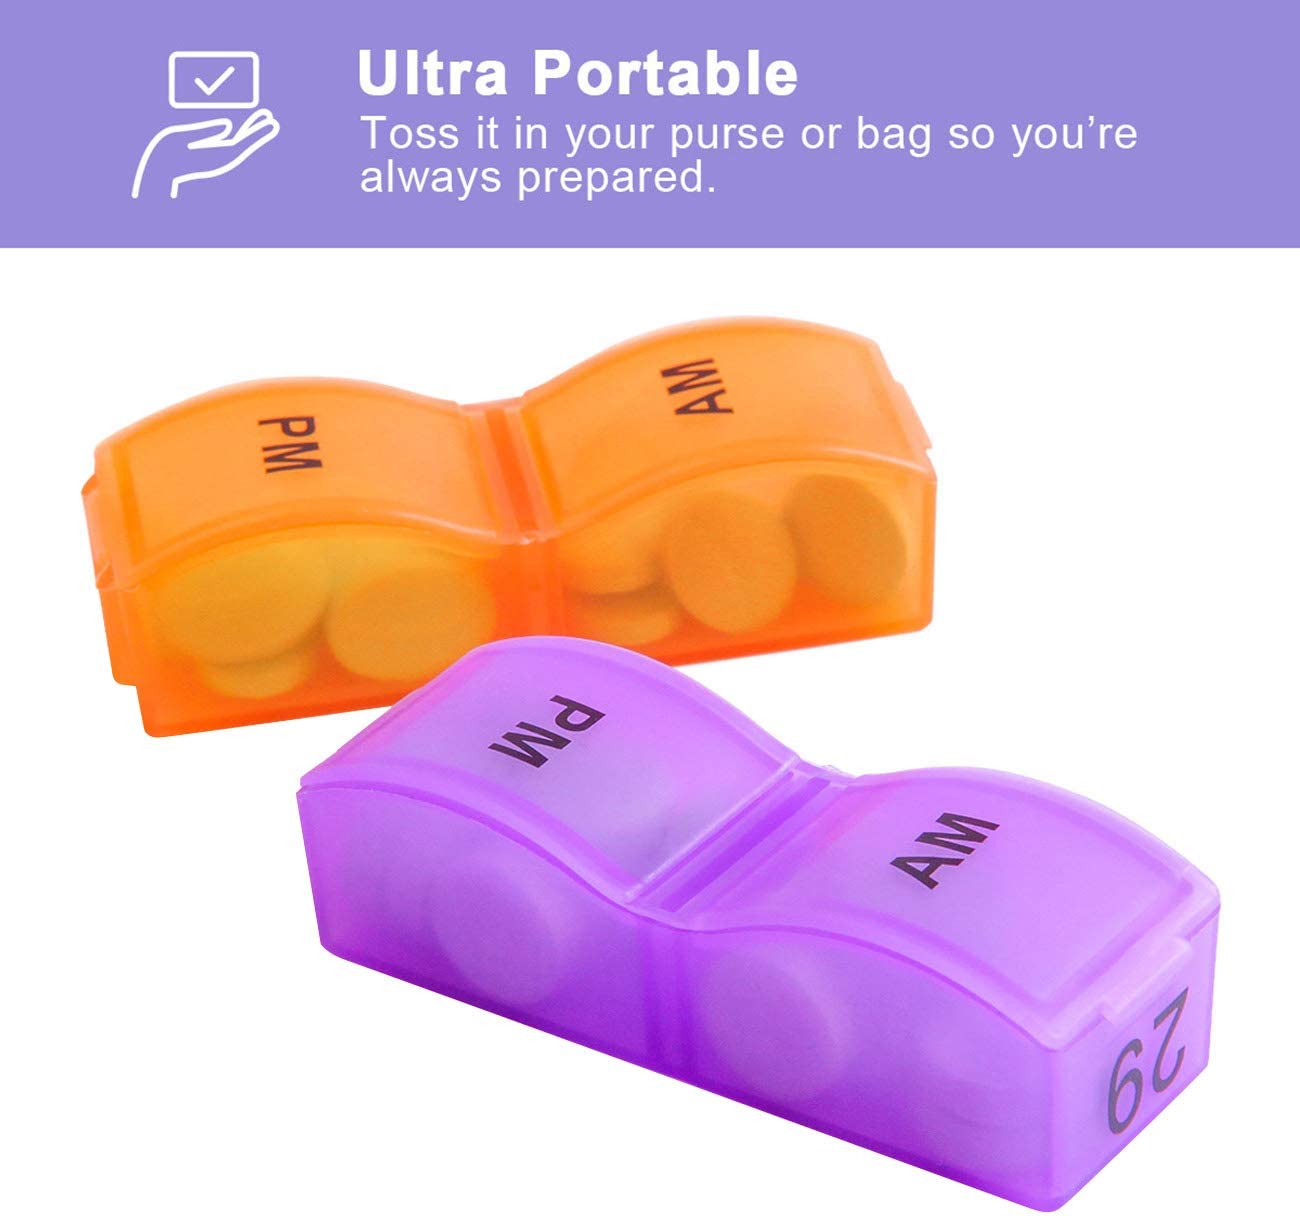 Monthly Big Capacity 31 Days Pill Case Storage Container